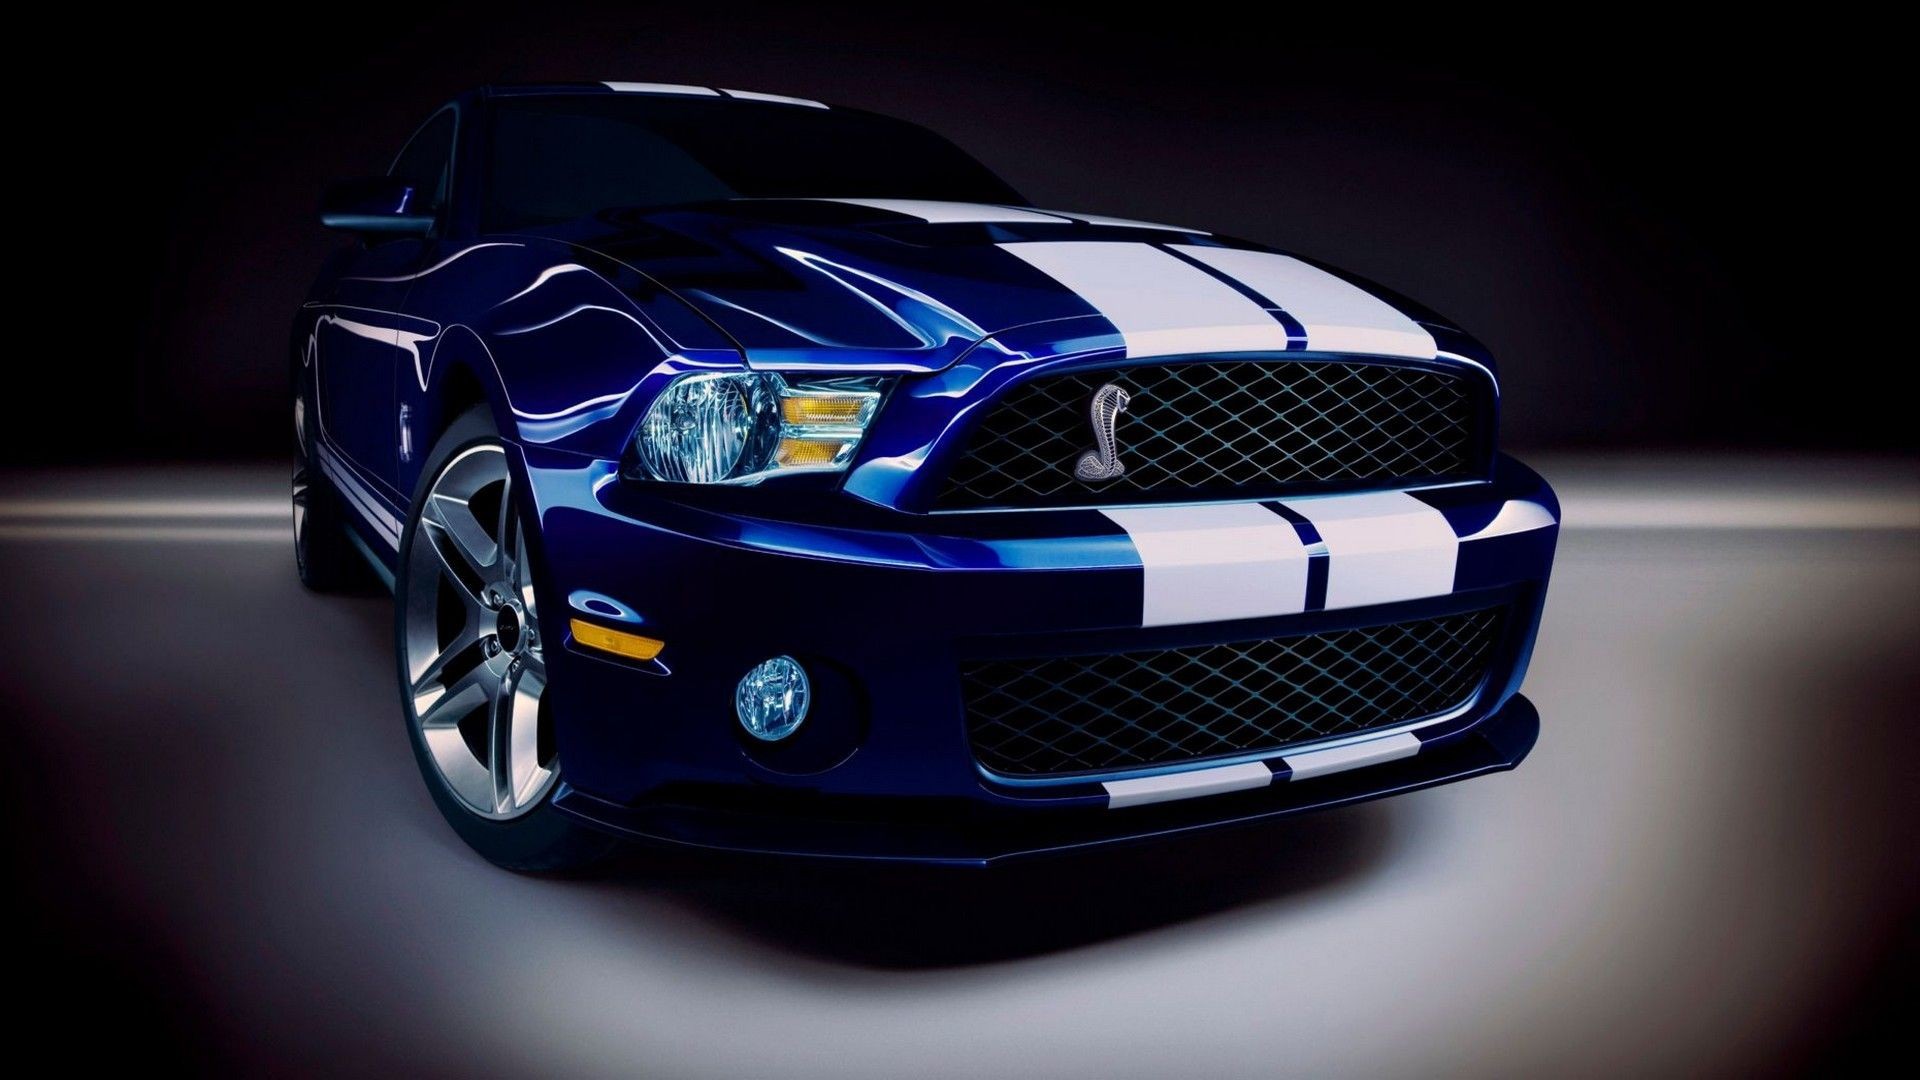 General 1920x1080 car Ford blue cars vehicle Ford Mustang Shelby American cars racing stripes Ford Mustang Shelby simple background